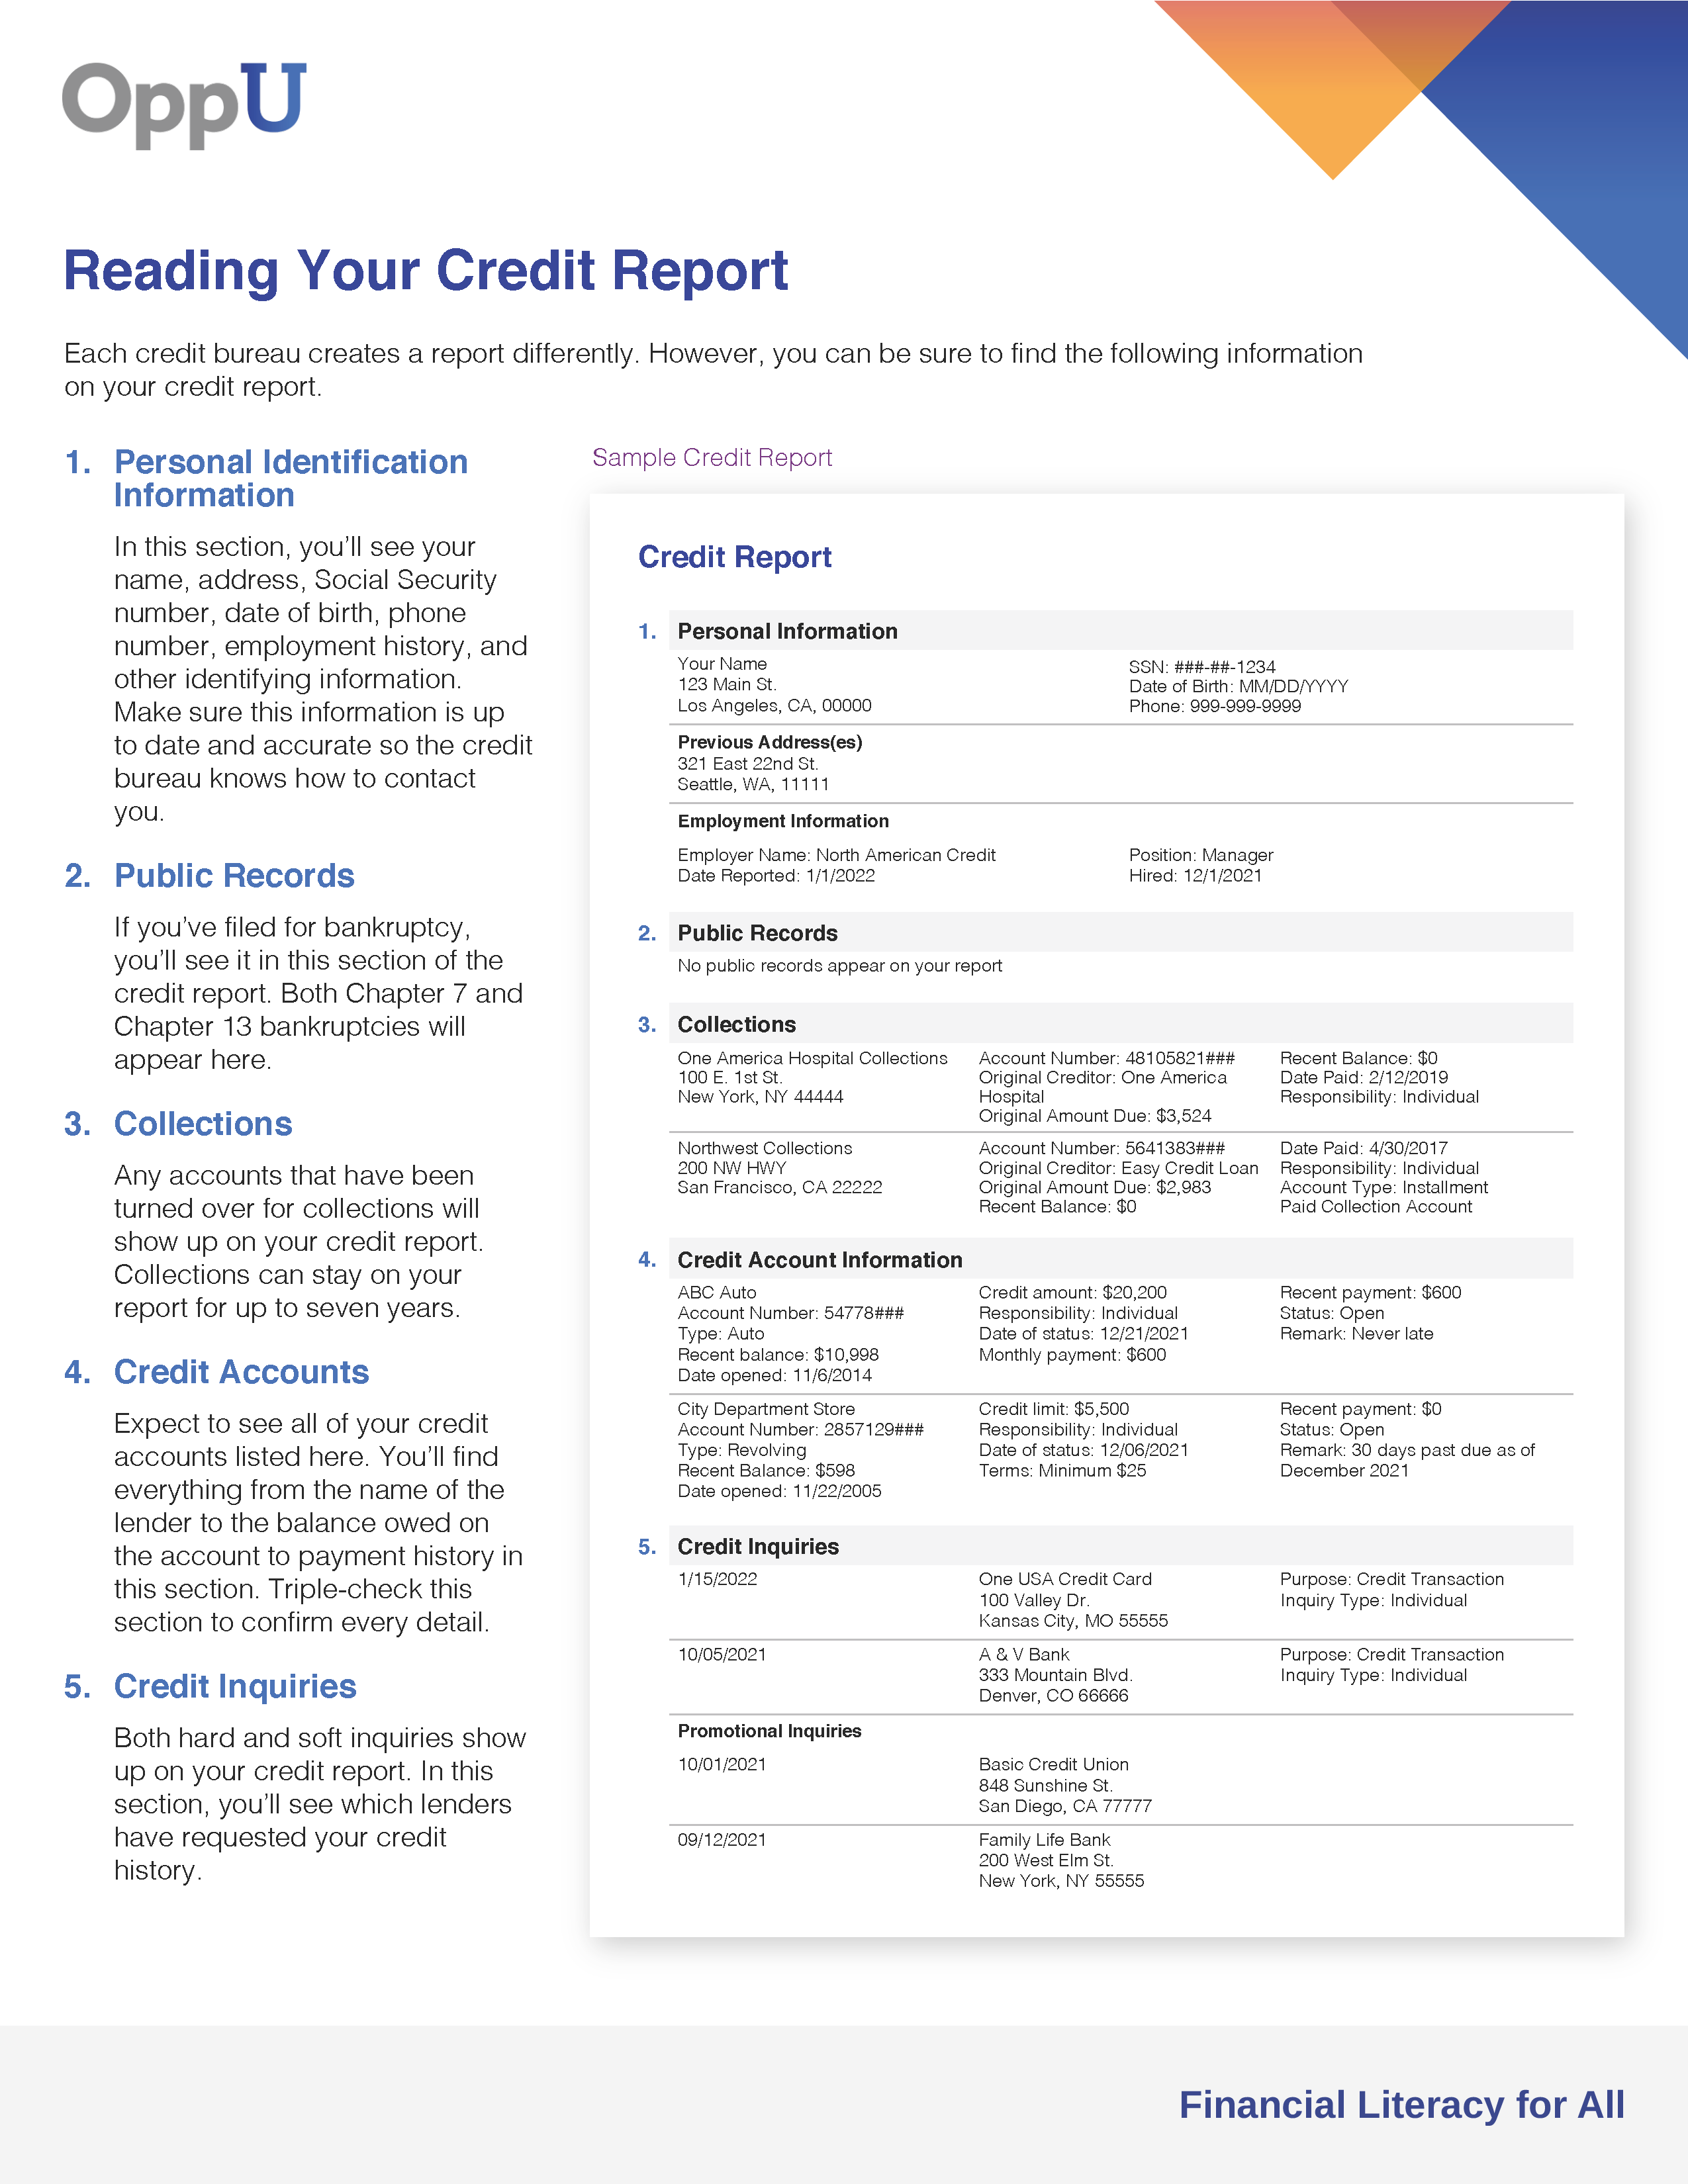 an infographic that outlines how to read your credit report